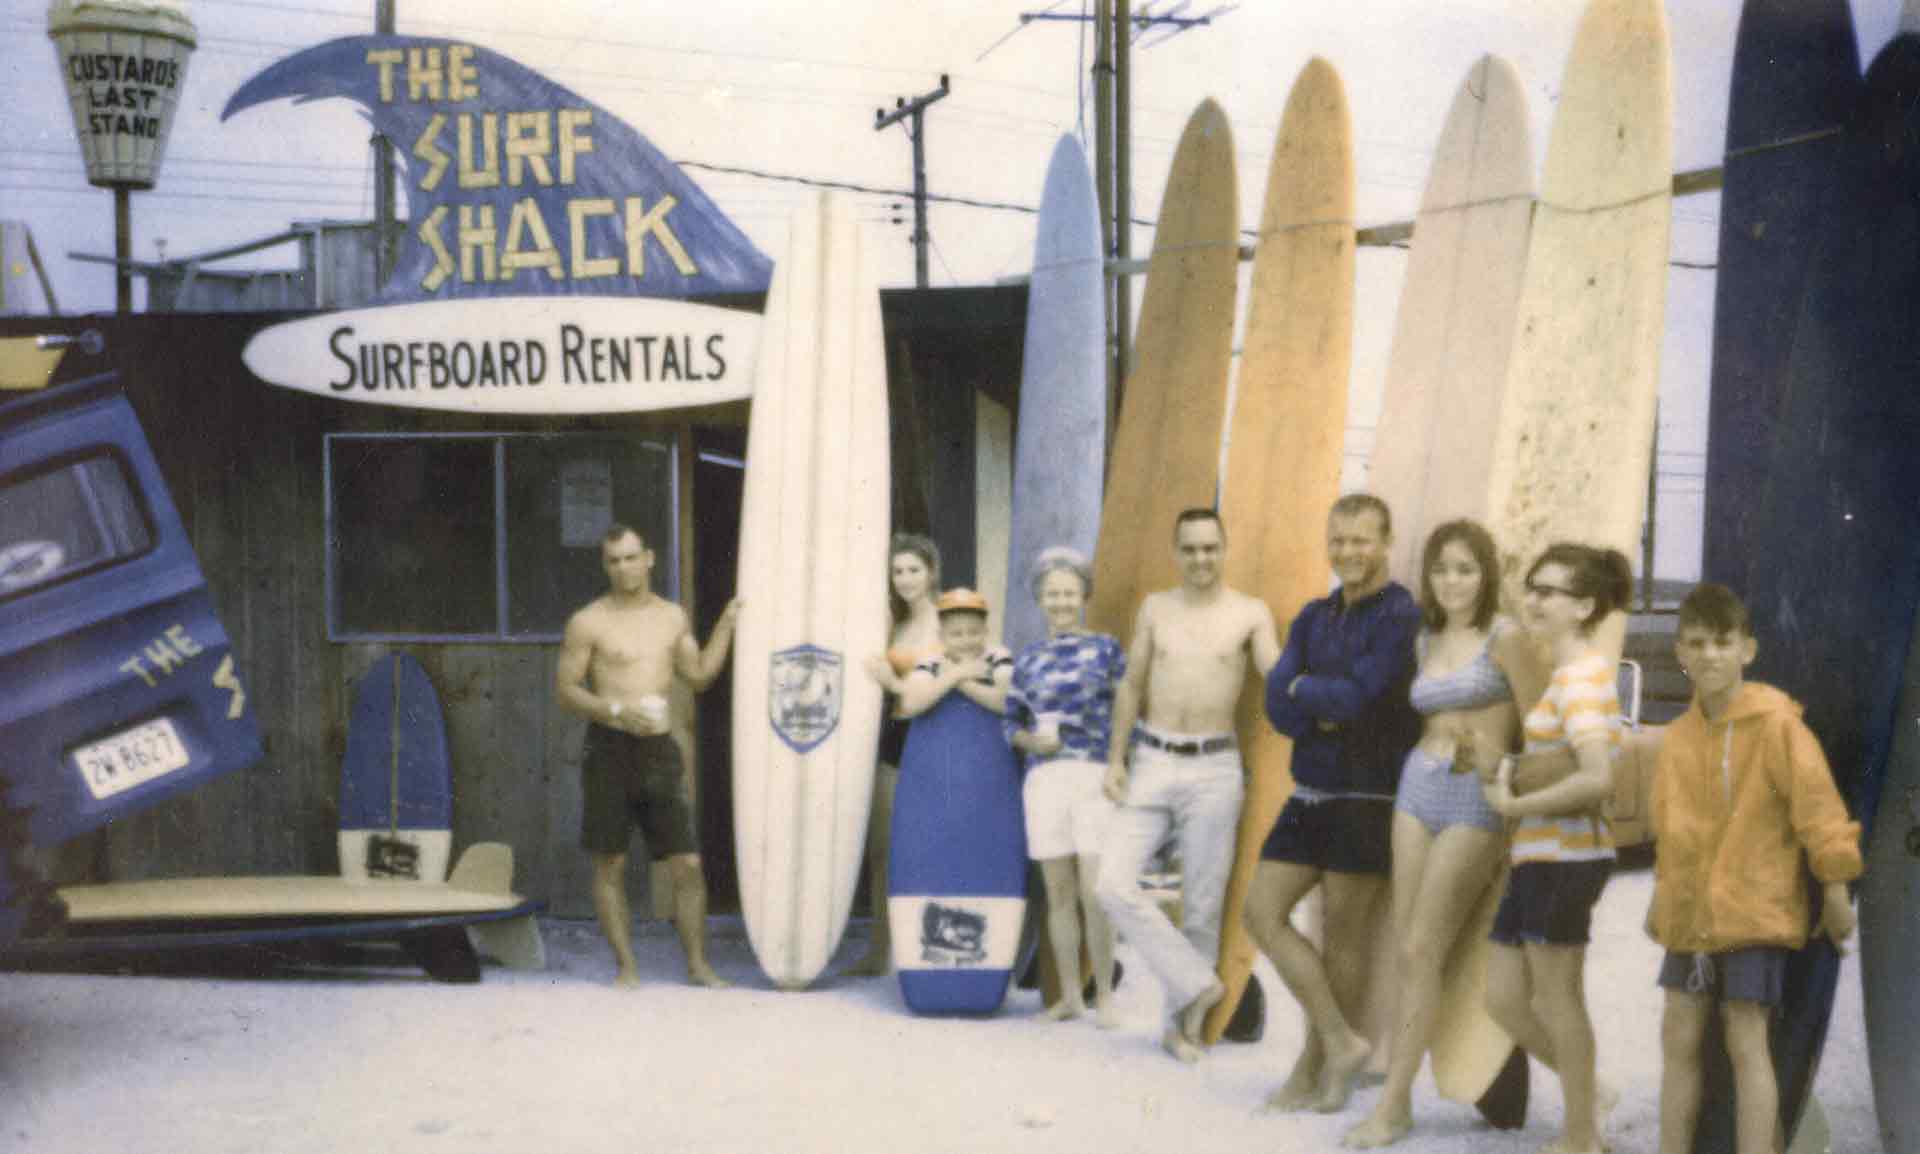 Old photo of surfers with long boards